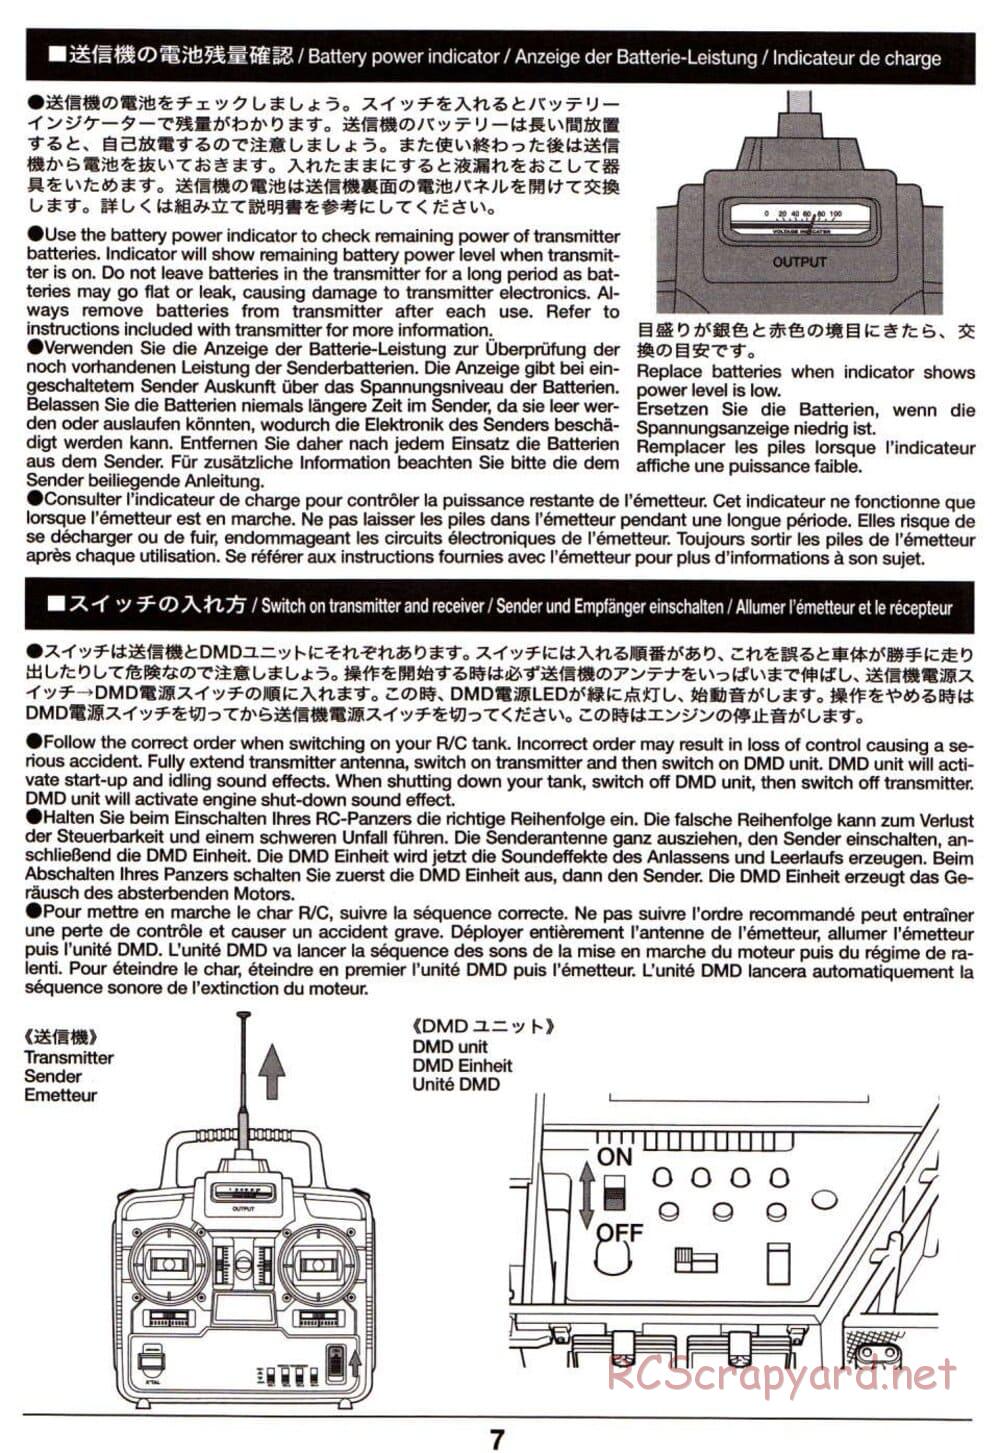 Tamiya - Leopard 2 A6 - 1/16 Scale Chassis - Operation Manual - Page 7